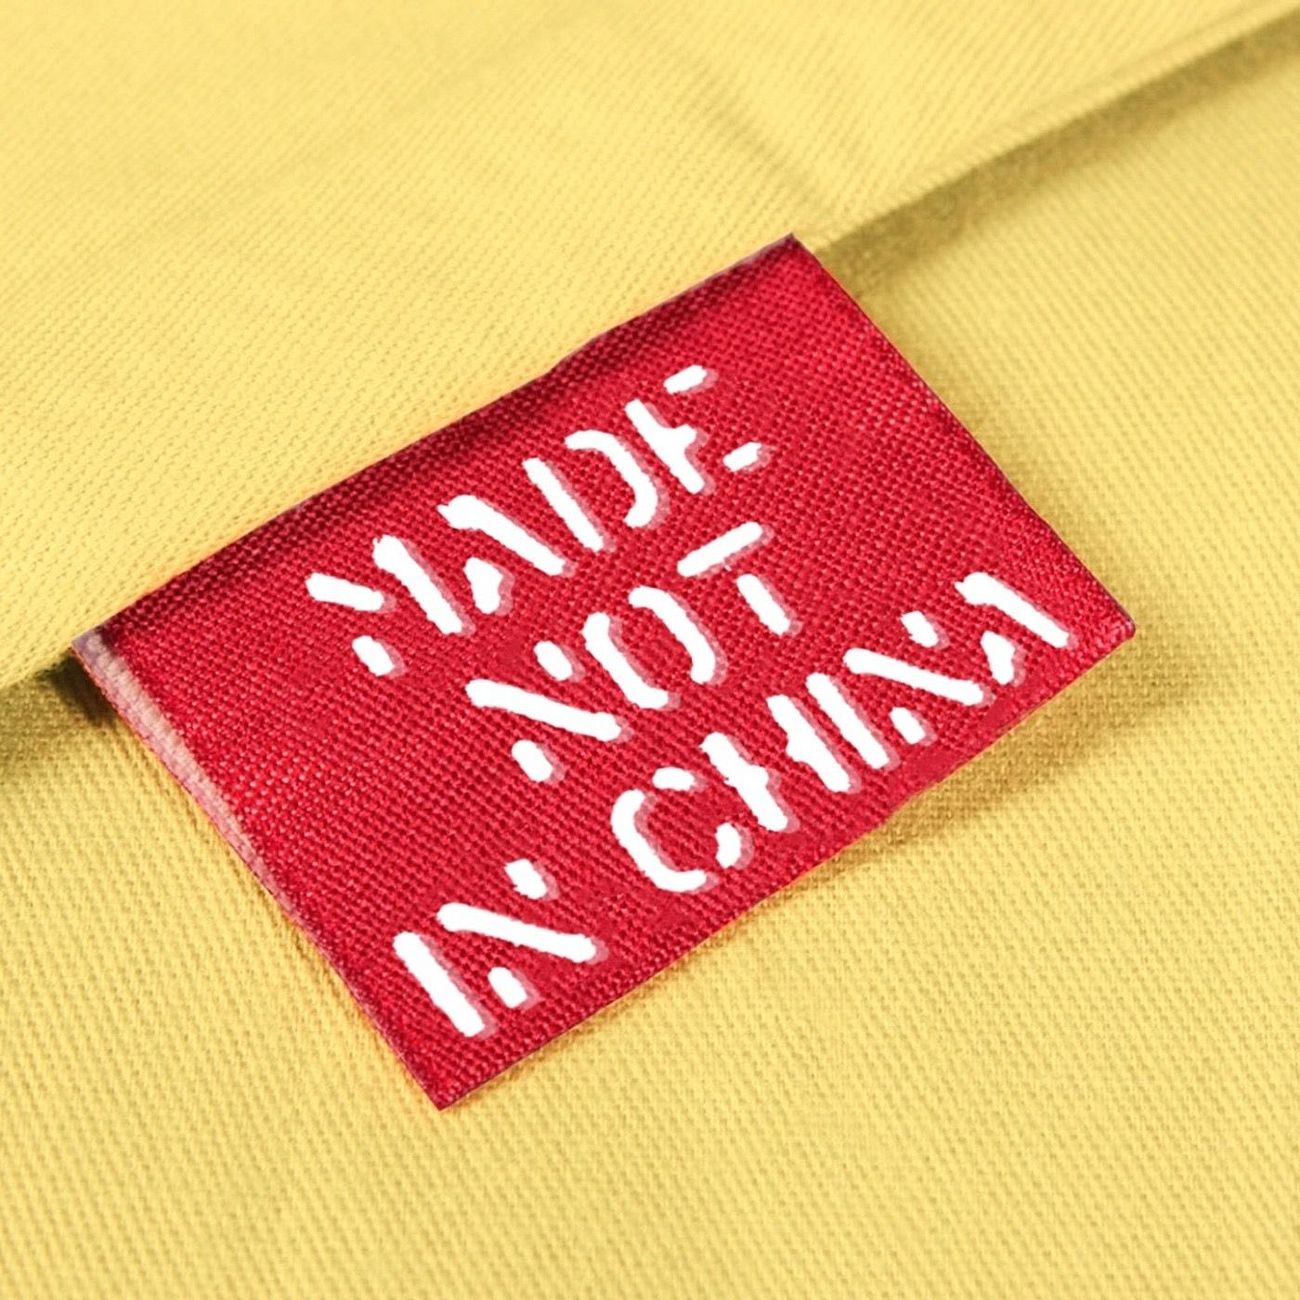 Made not in China